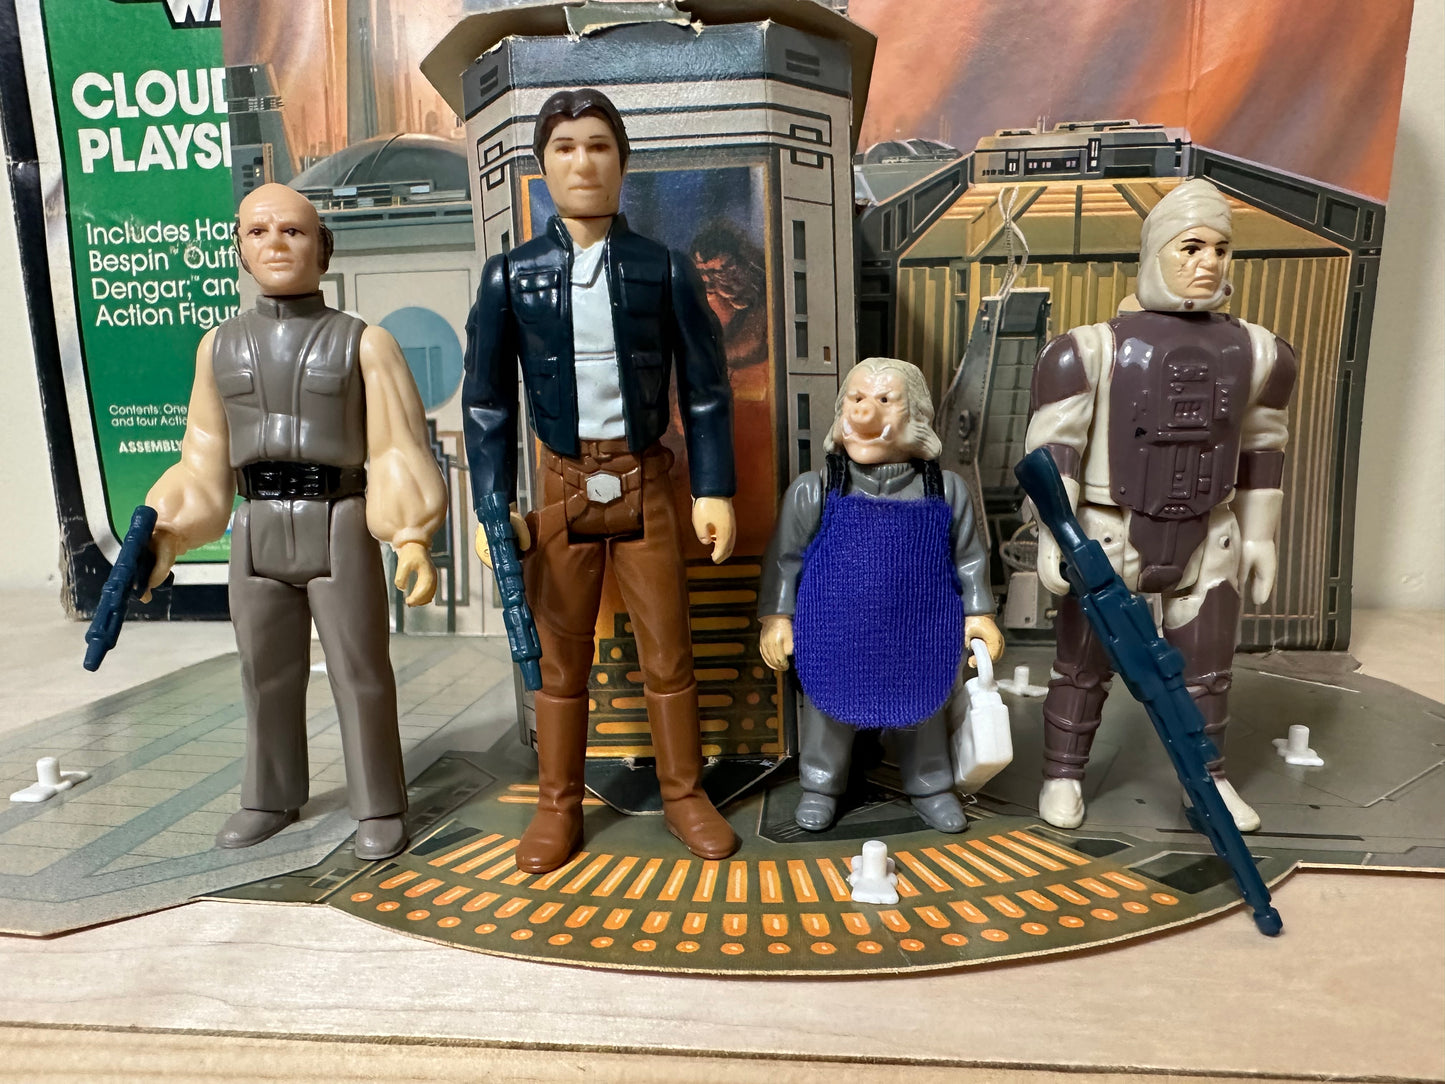 1980 Star Wars Cloud City Empire Strikes Back ESB Playset with original Box and Action Figures